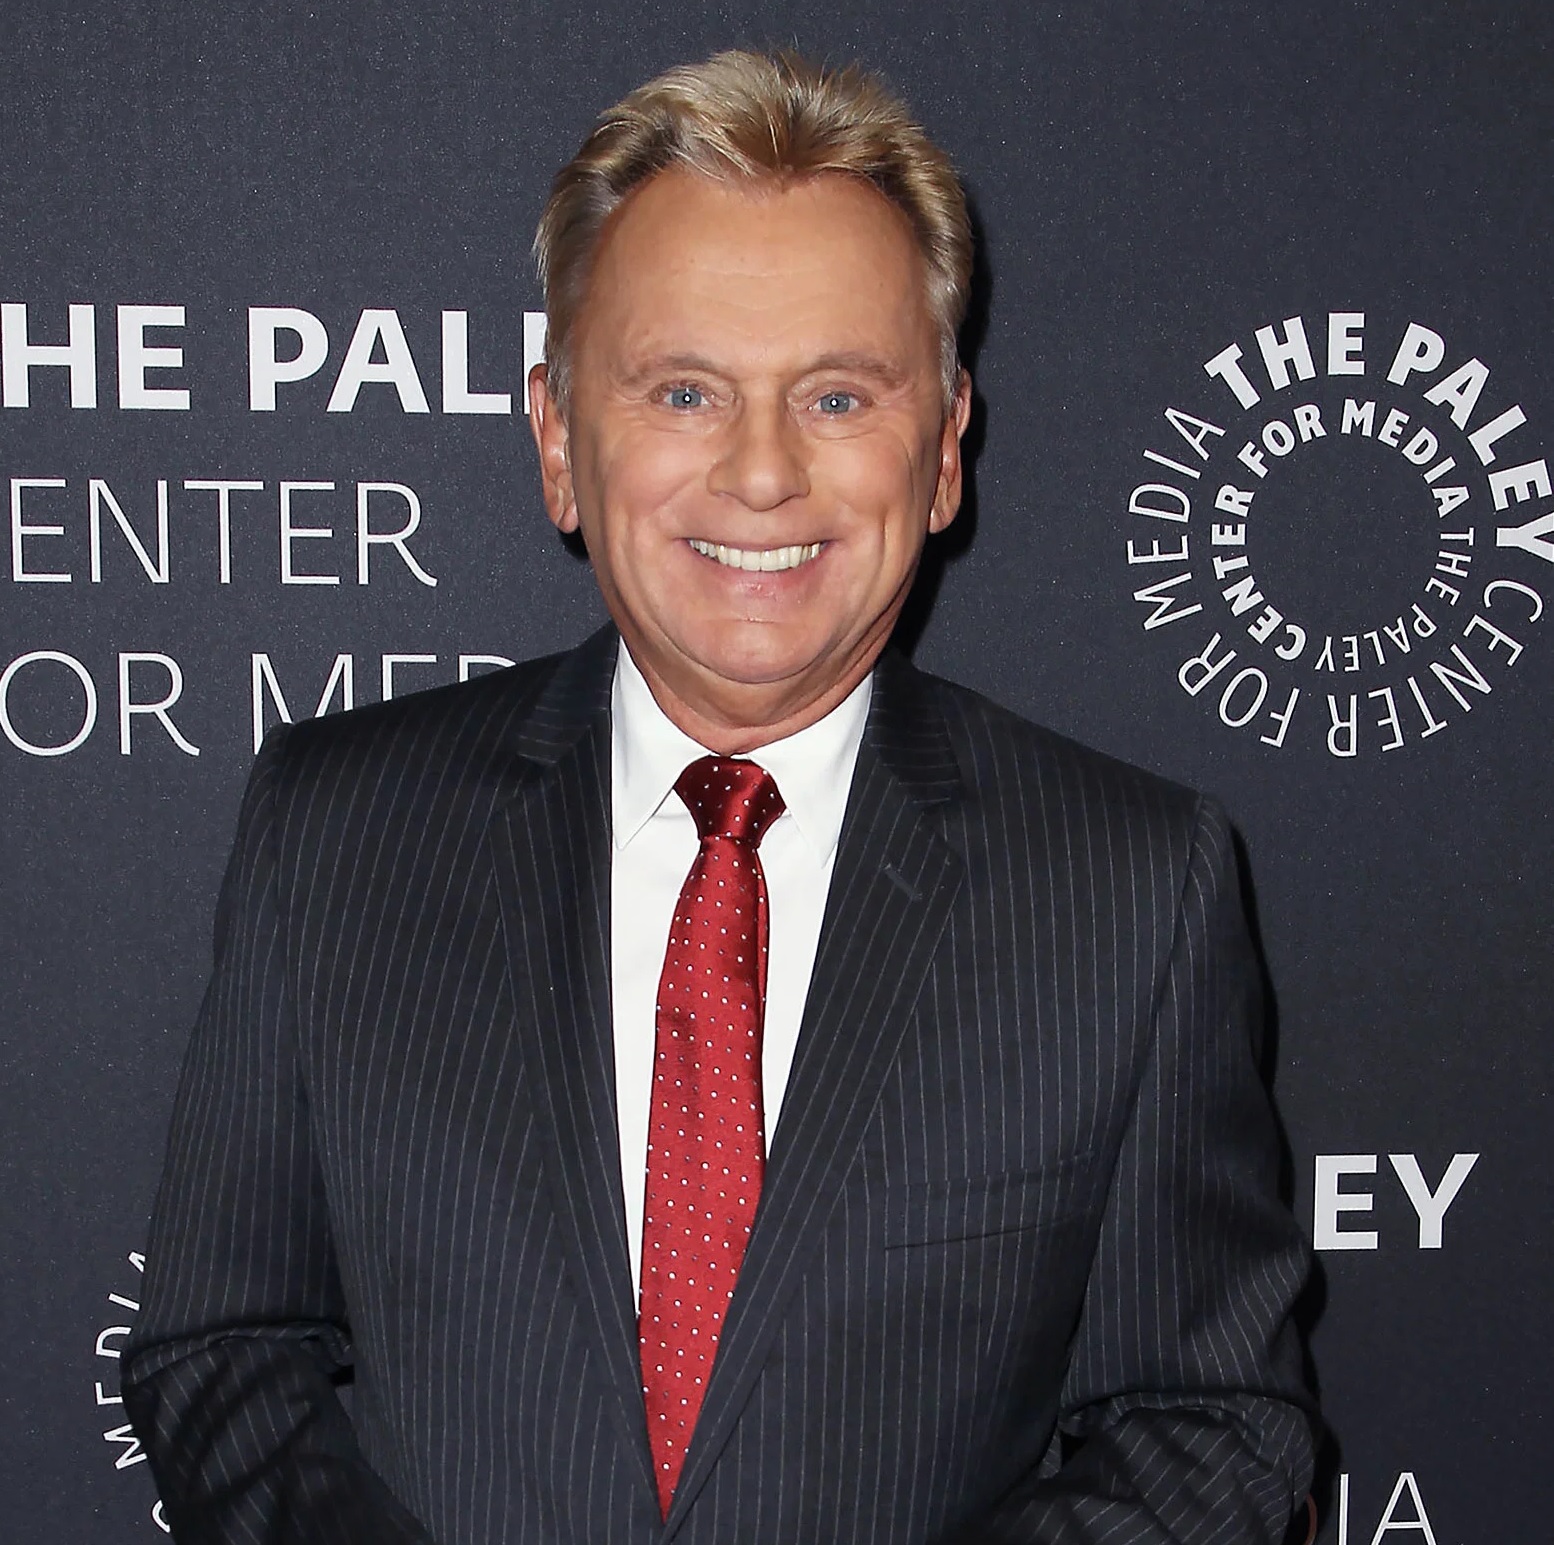 Pat Sajak is the proud father of two children – meeting the Star’s Family ‘Wheel of Fortune.